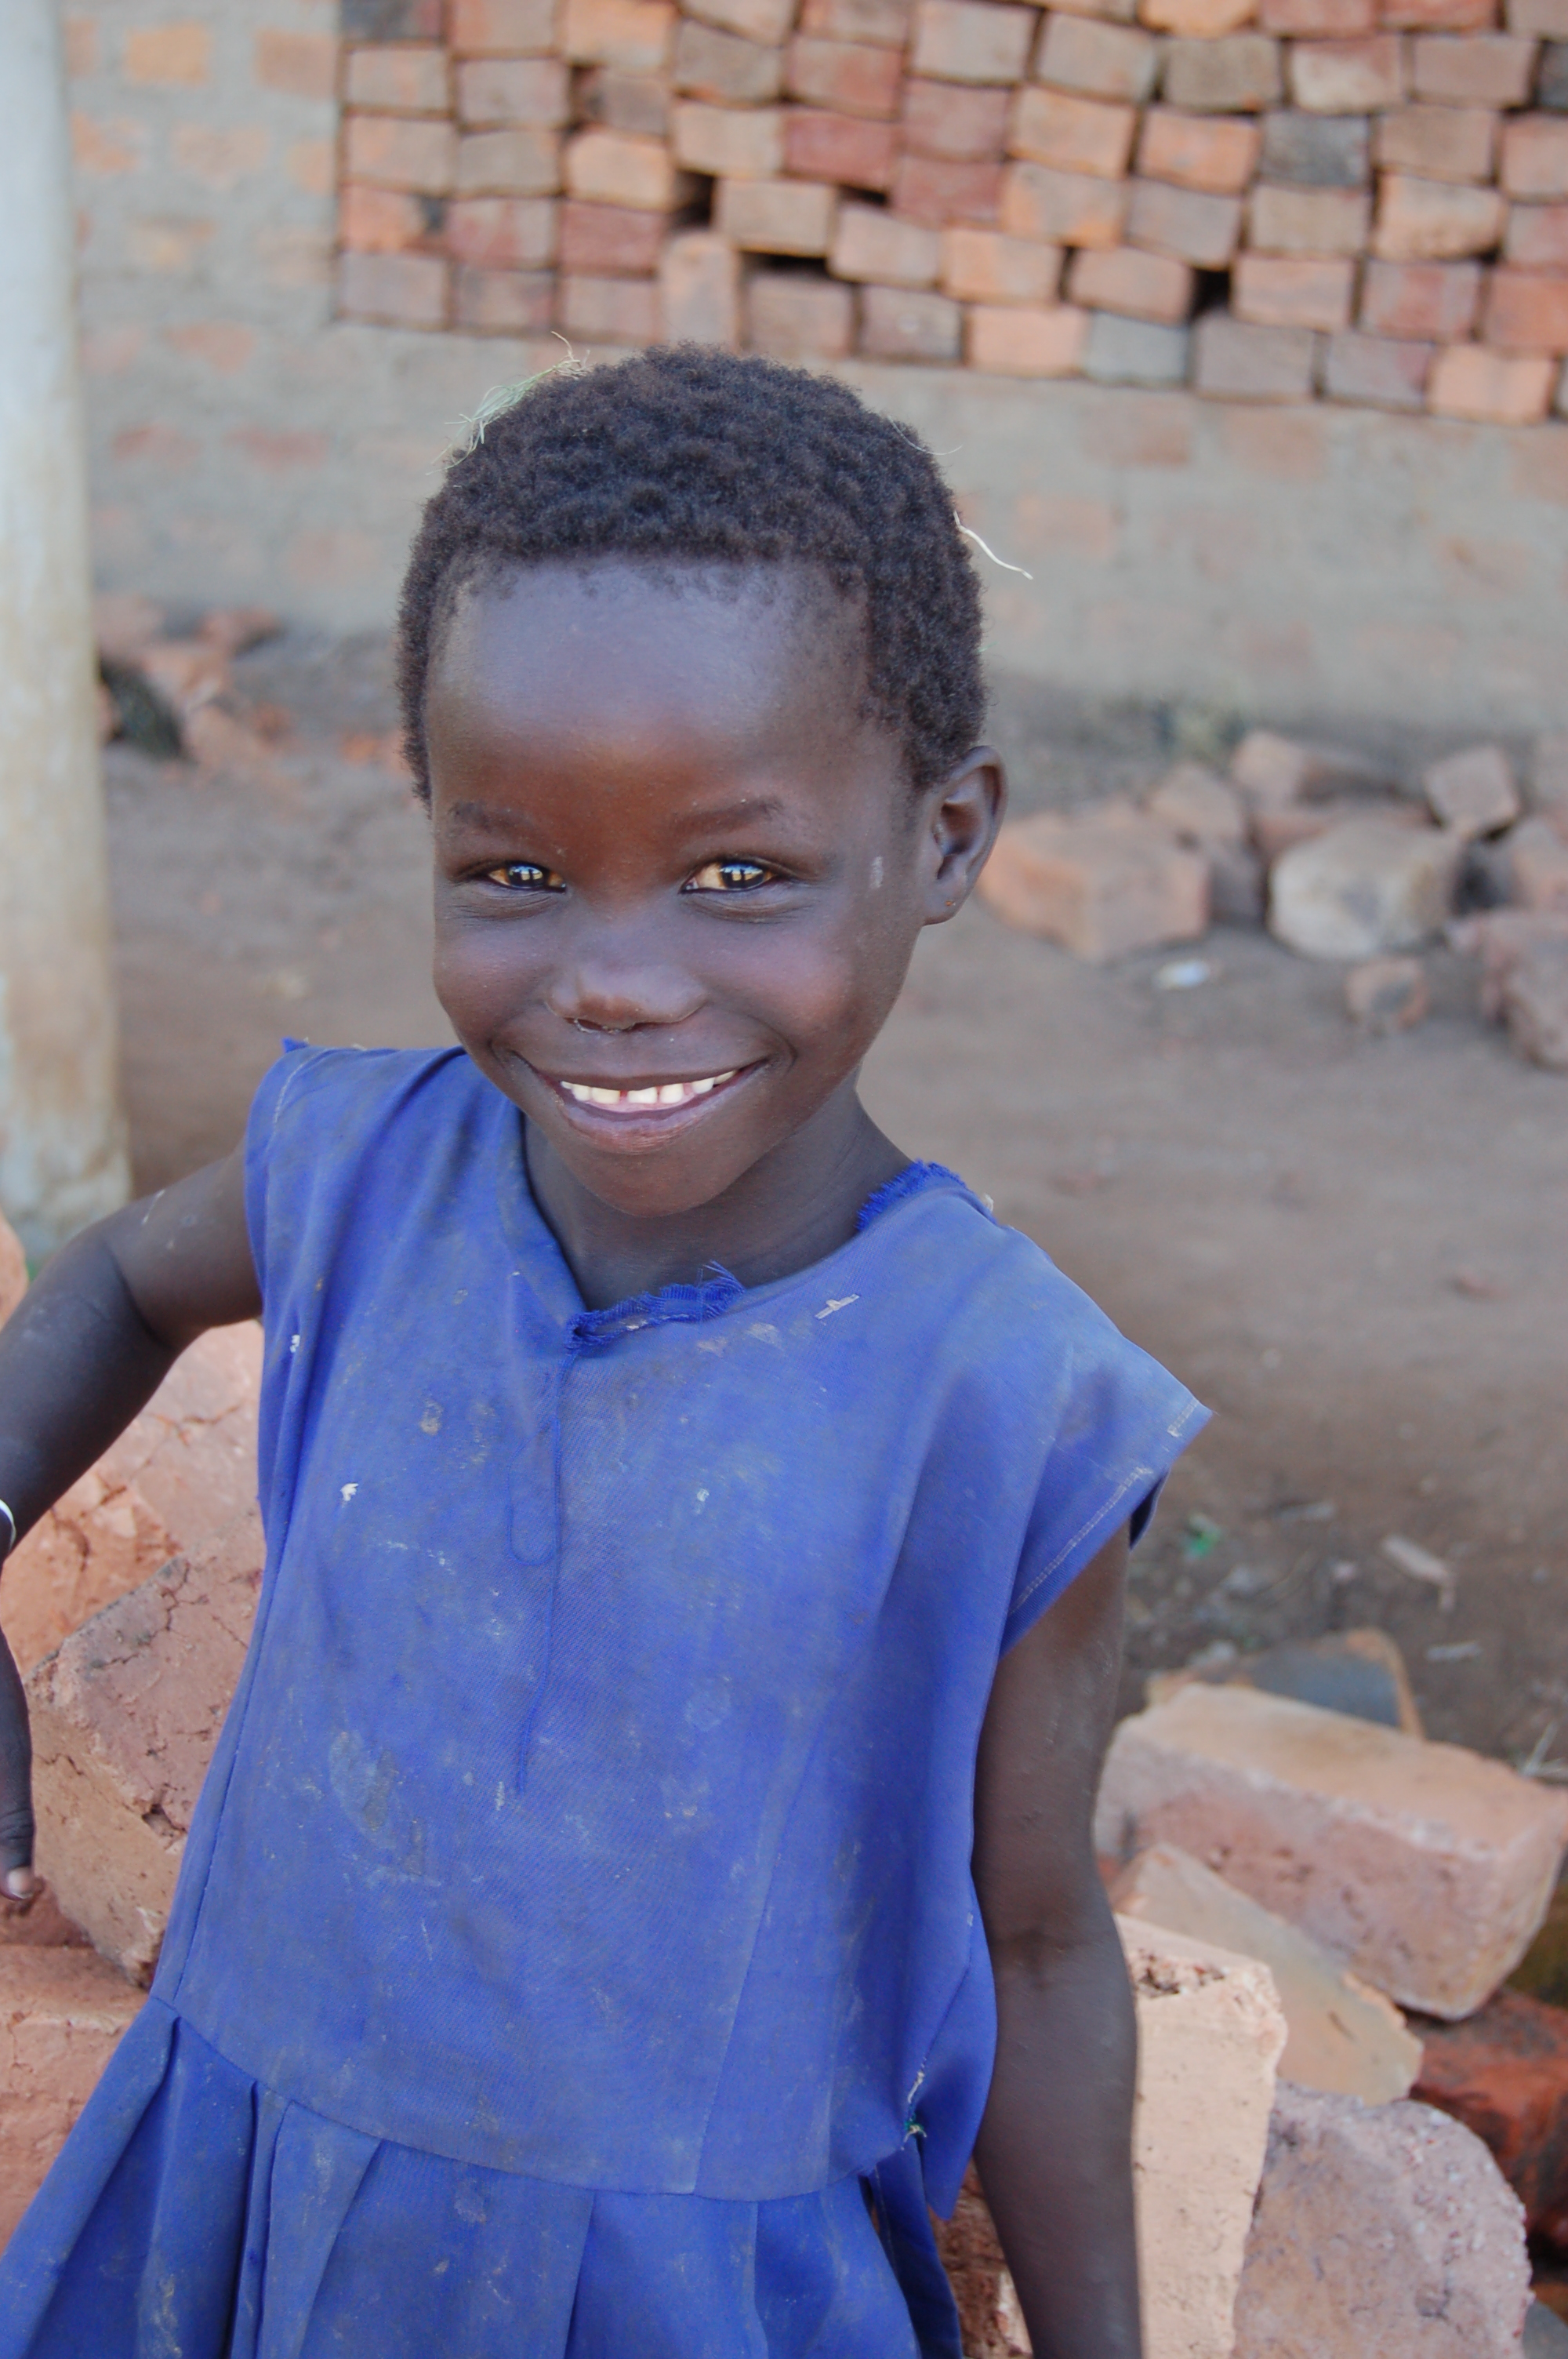 Young Girl in Blue - Bricks in the Background.jpg